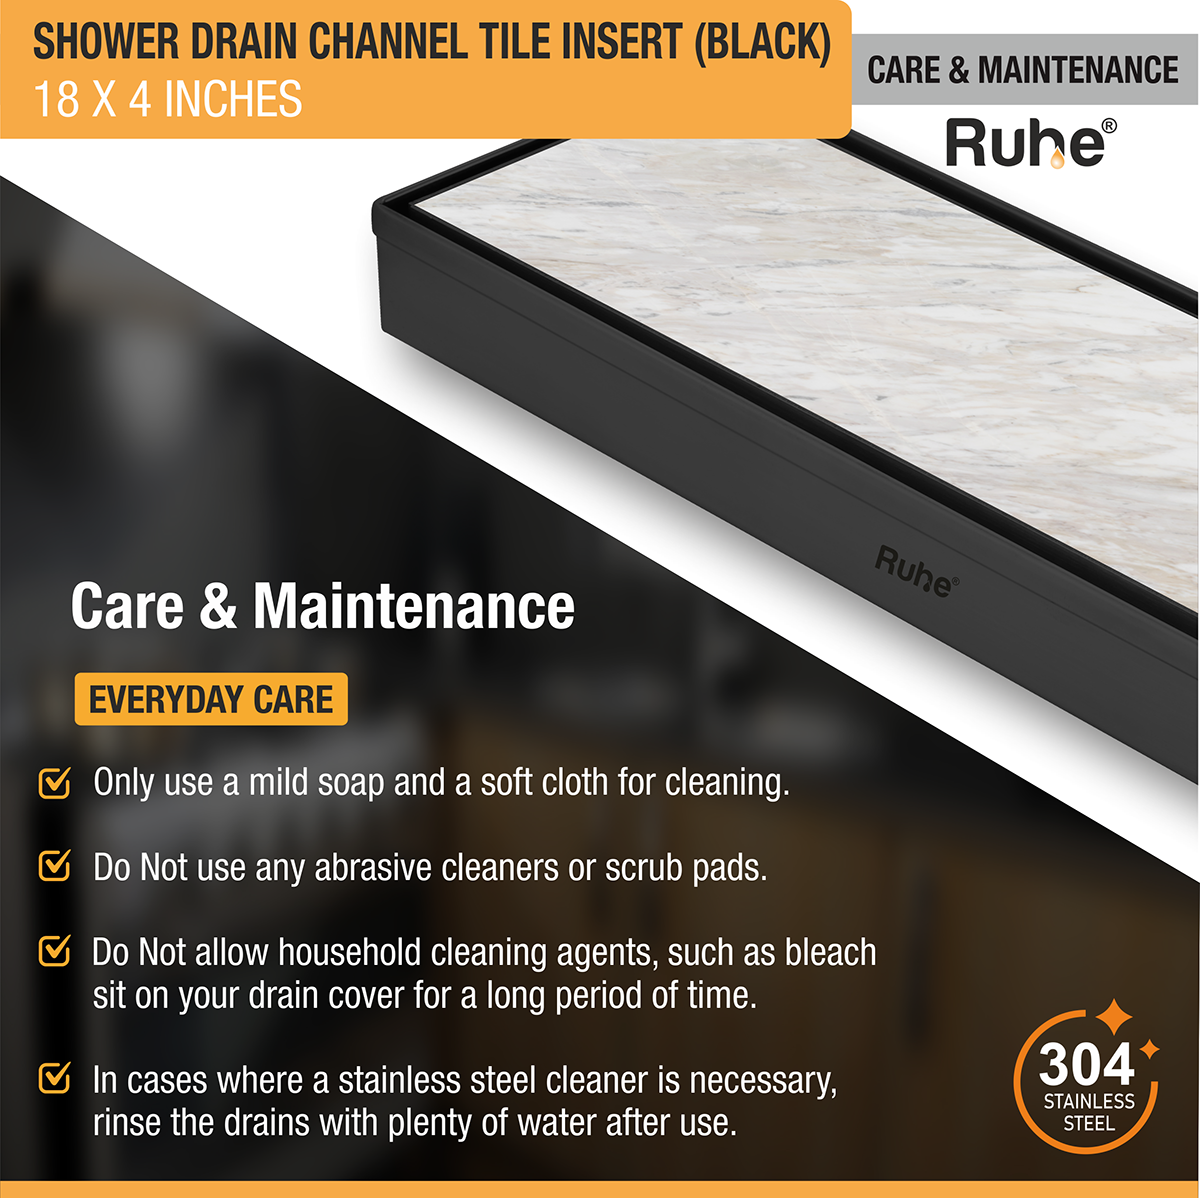 Tile Insert Shower Drain Channel (18 x 4 Inches) Black PVD Coated - by Ruhe®